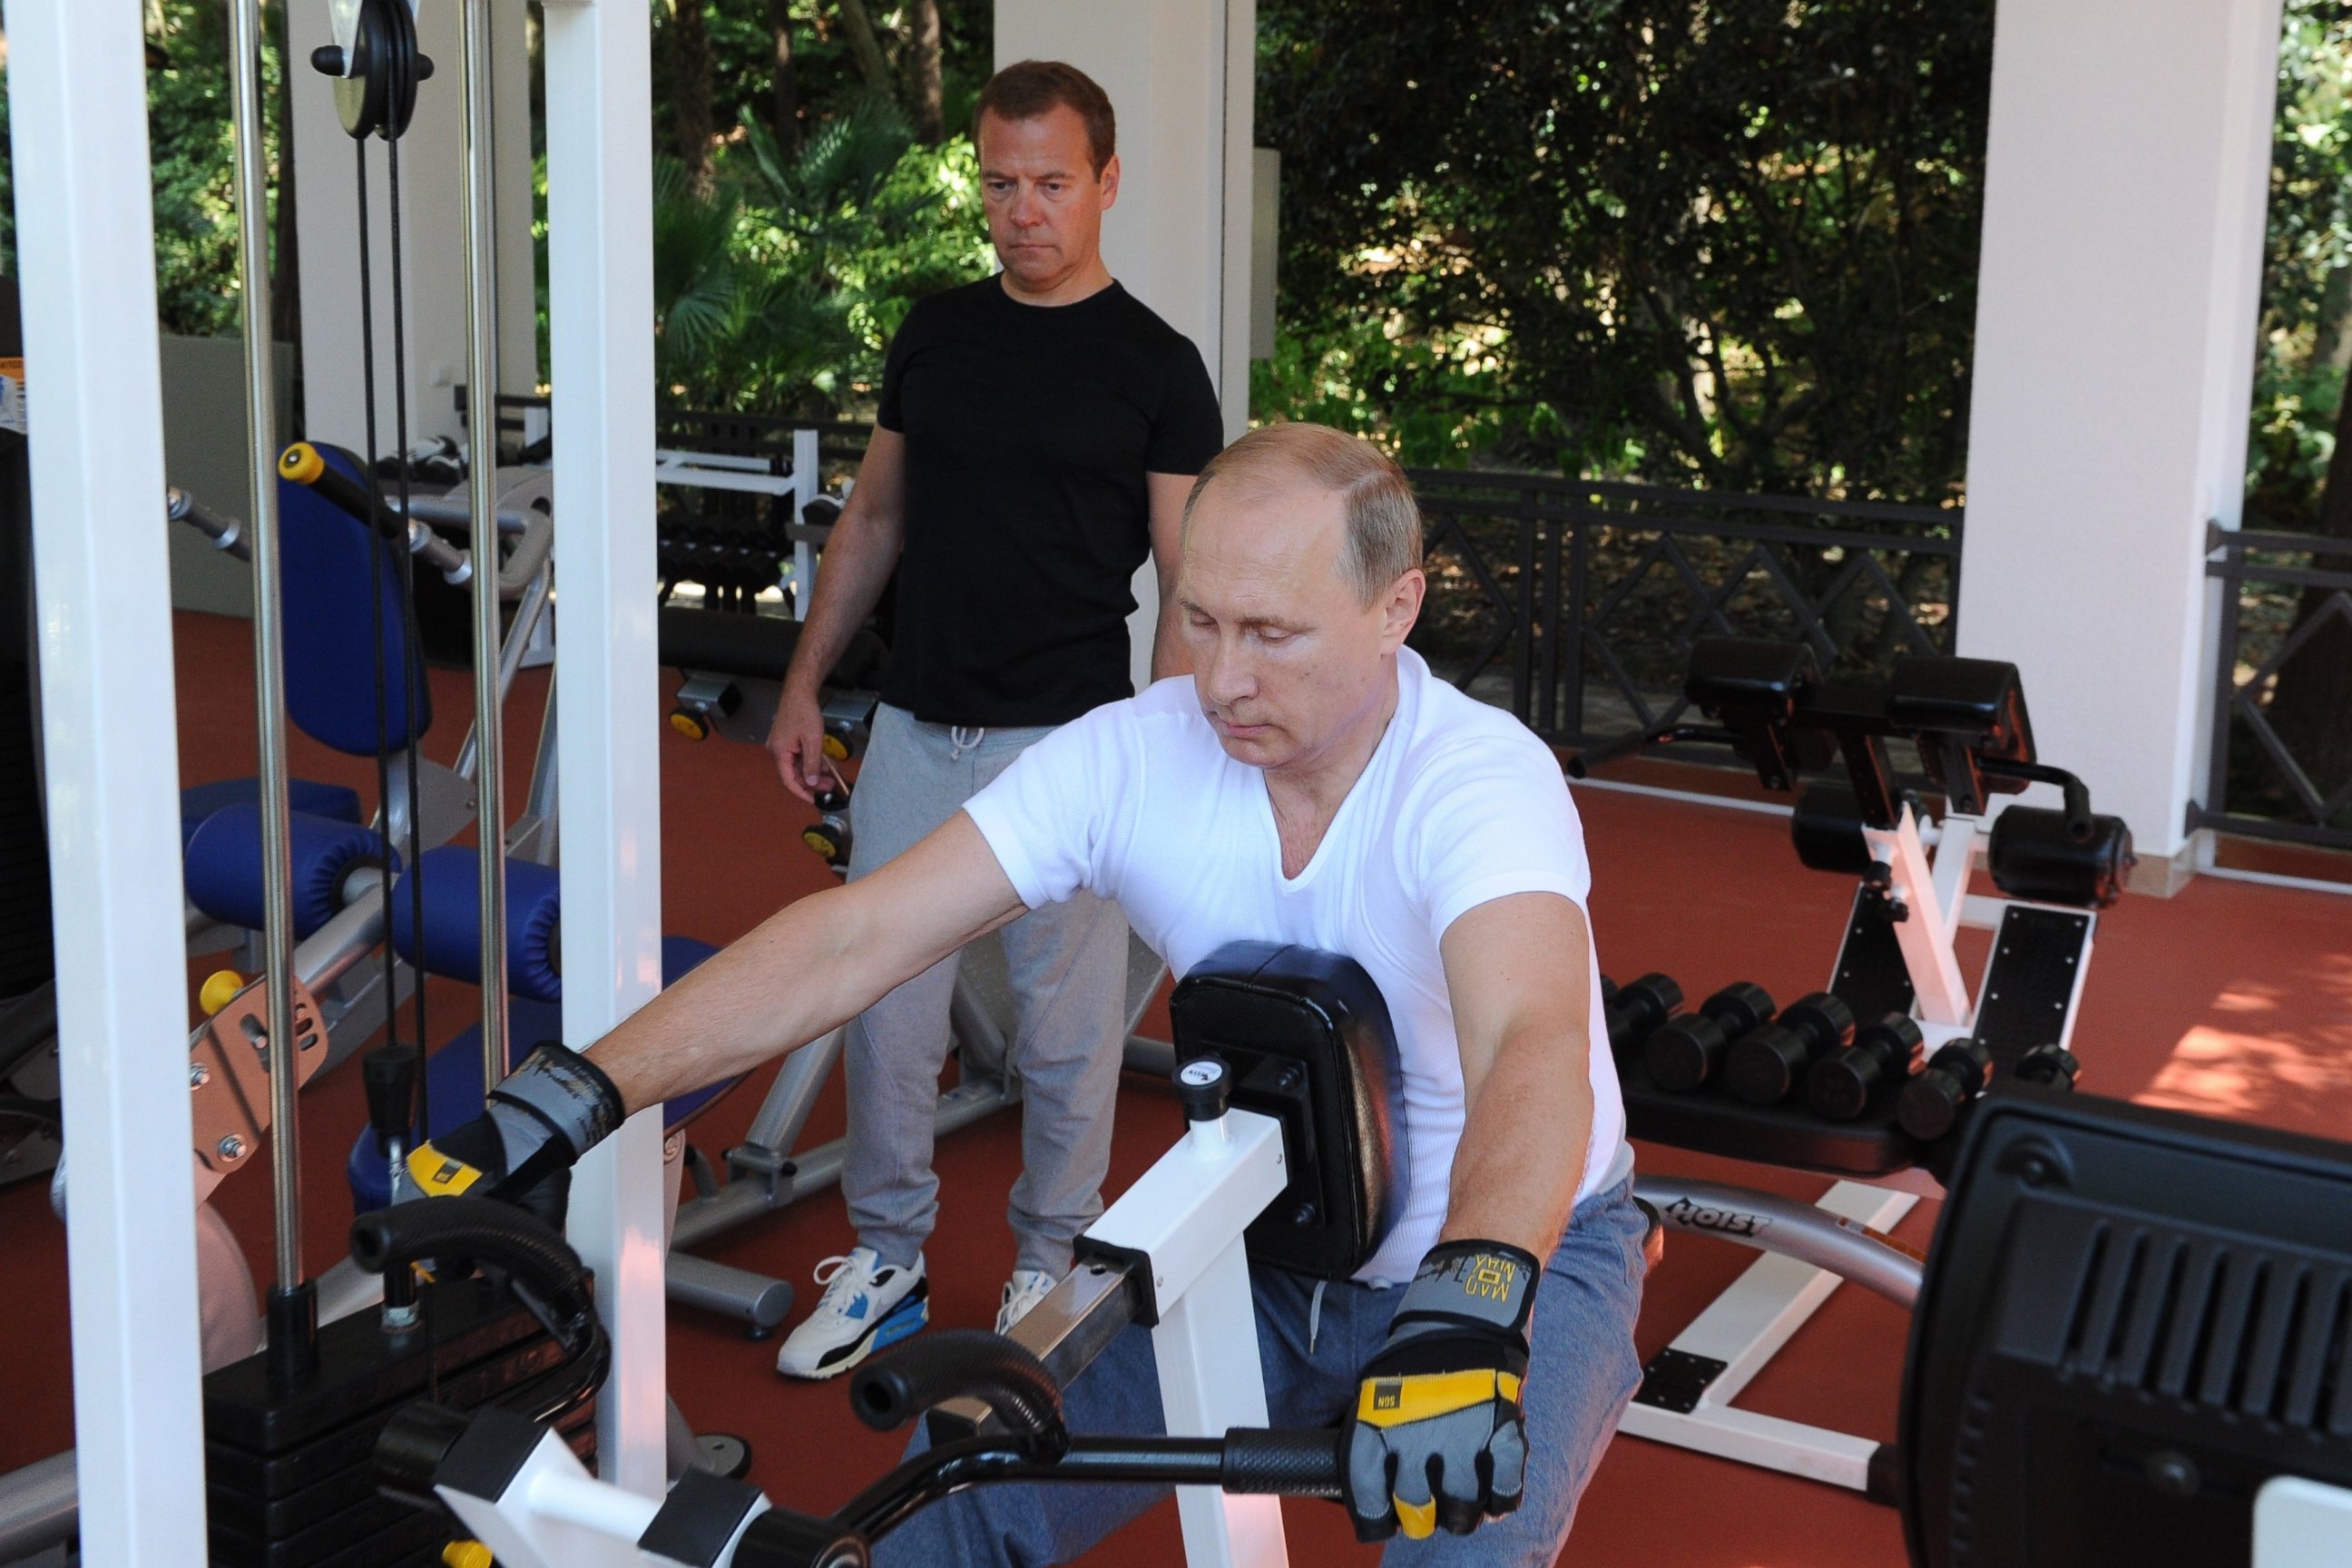 PHOTO: Russian President Vladimir Putin and Prime Minister Dmitry Medvedev work out at a gym at the Bocharov Ruchei state residence in Sochi on Aug. 30, 2015.